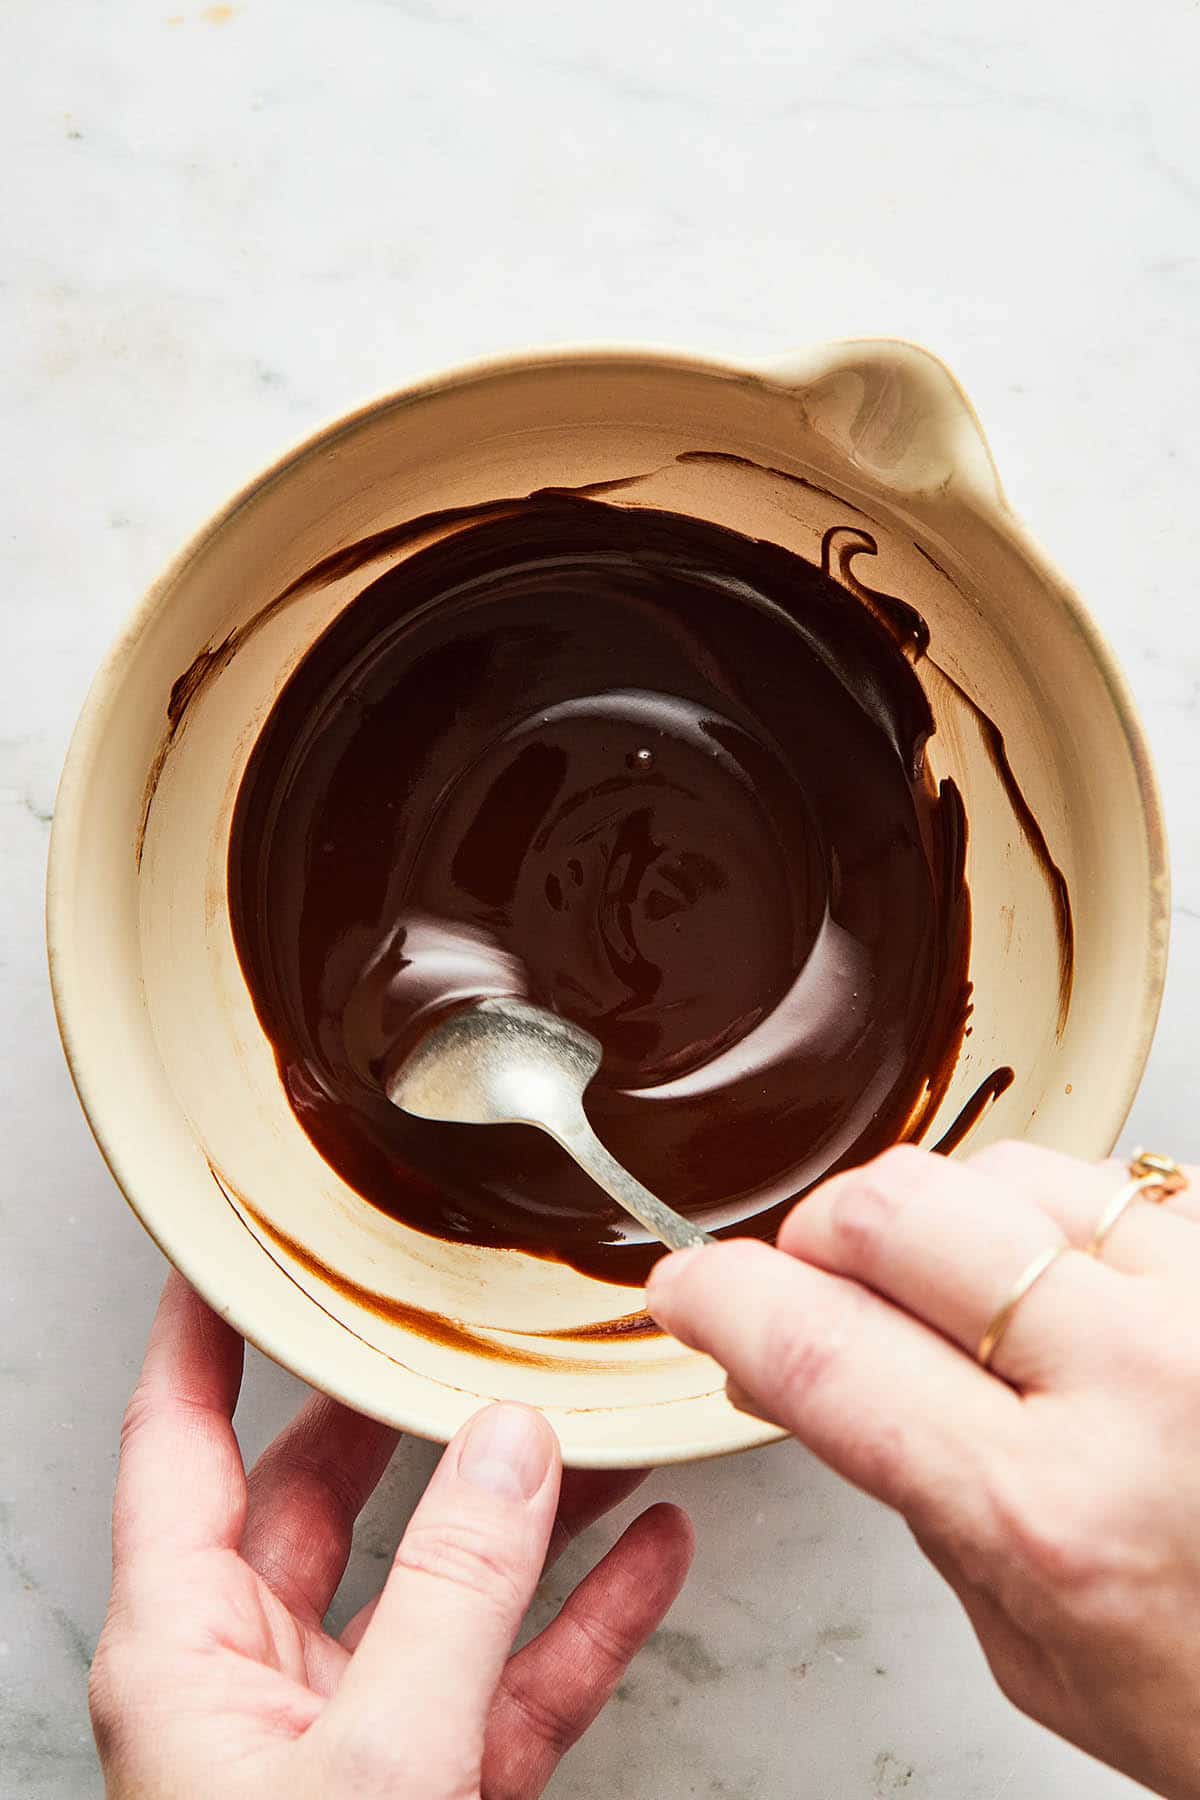 A hand using a spoon to stir chocolate glaze in a small mixing bowl.